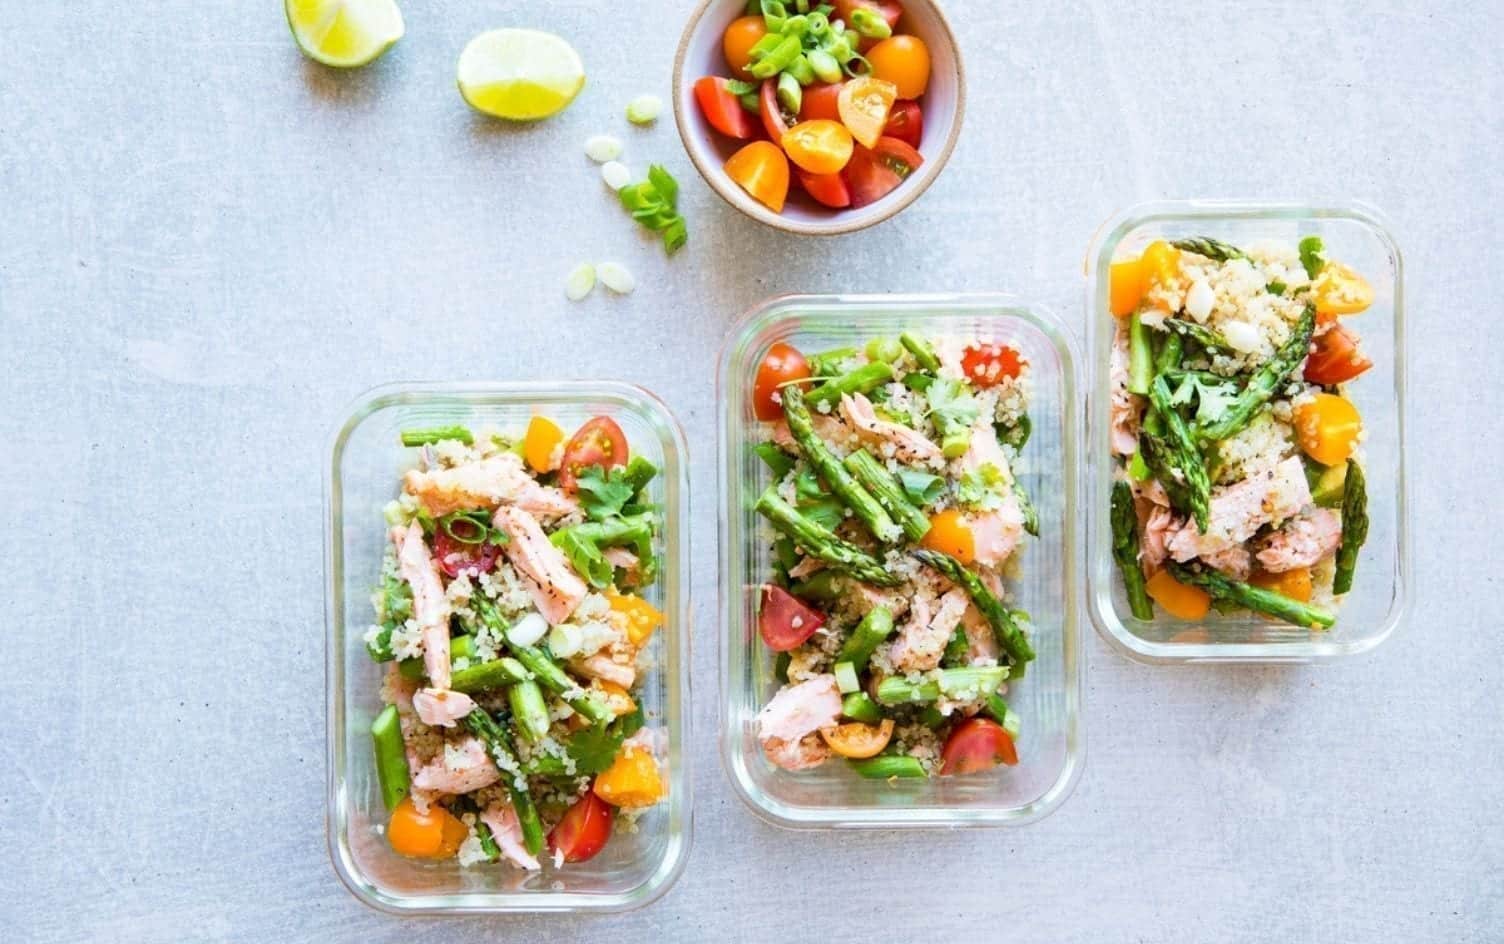 https://blog.myfitnesspal.com/wp-content/uploads/2020/09/10-Dietitian-Approved-Packed-Lunch-Tricks.jpg